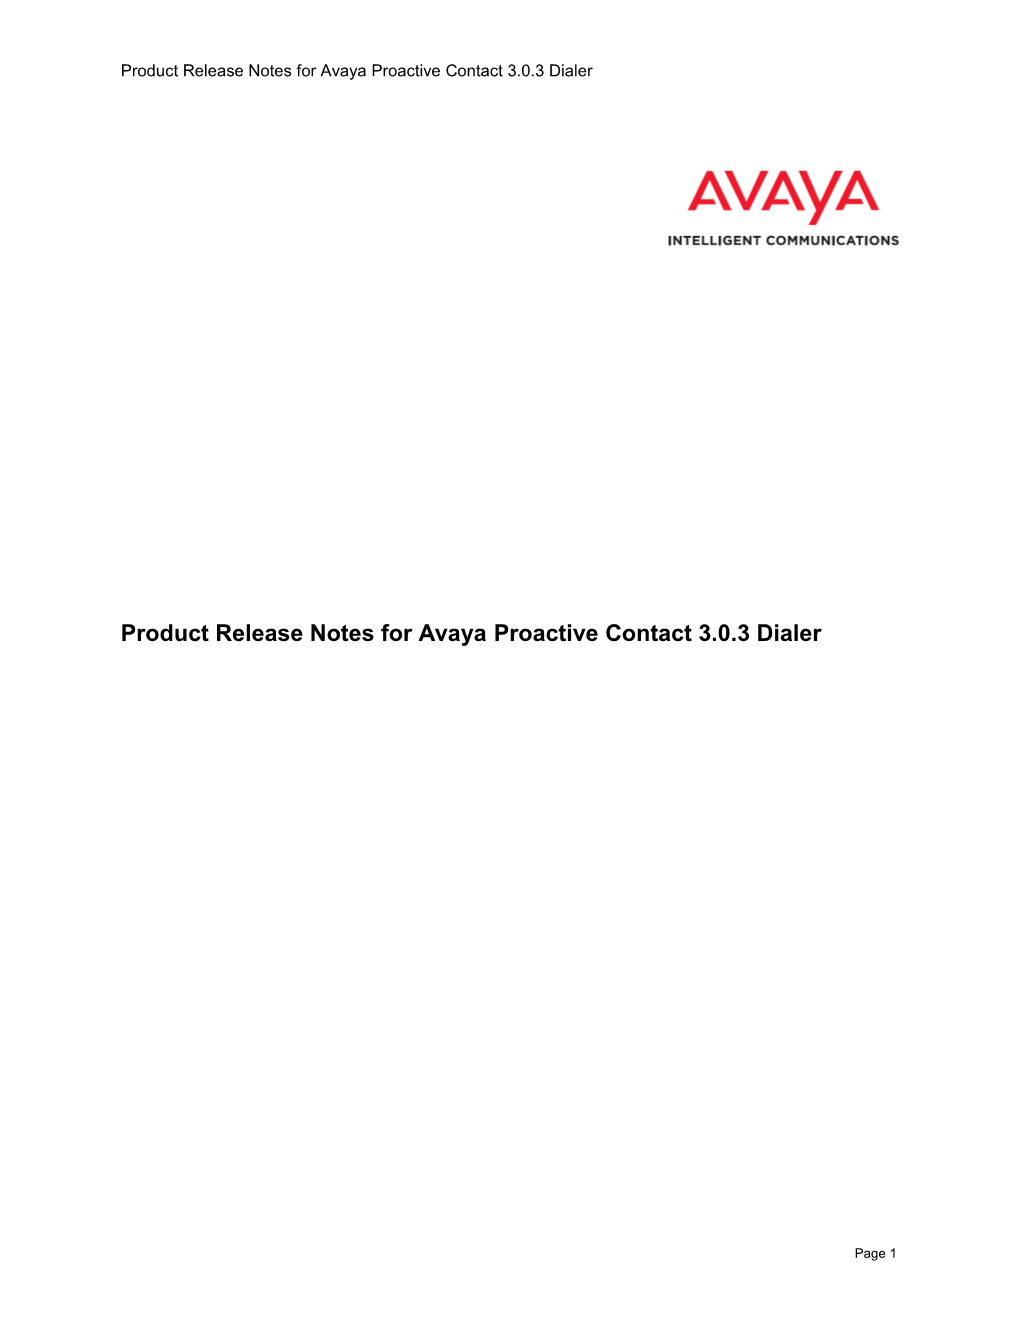 Product Release Notes for Avaya Proactive Contact 3.0.3 Dialer